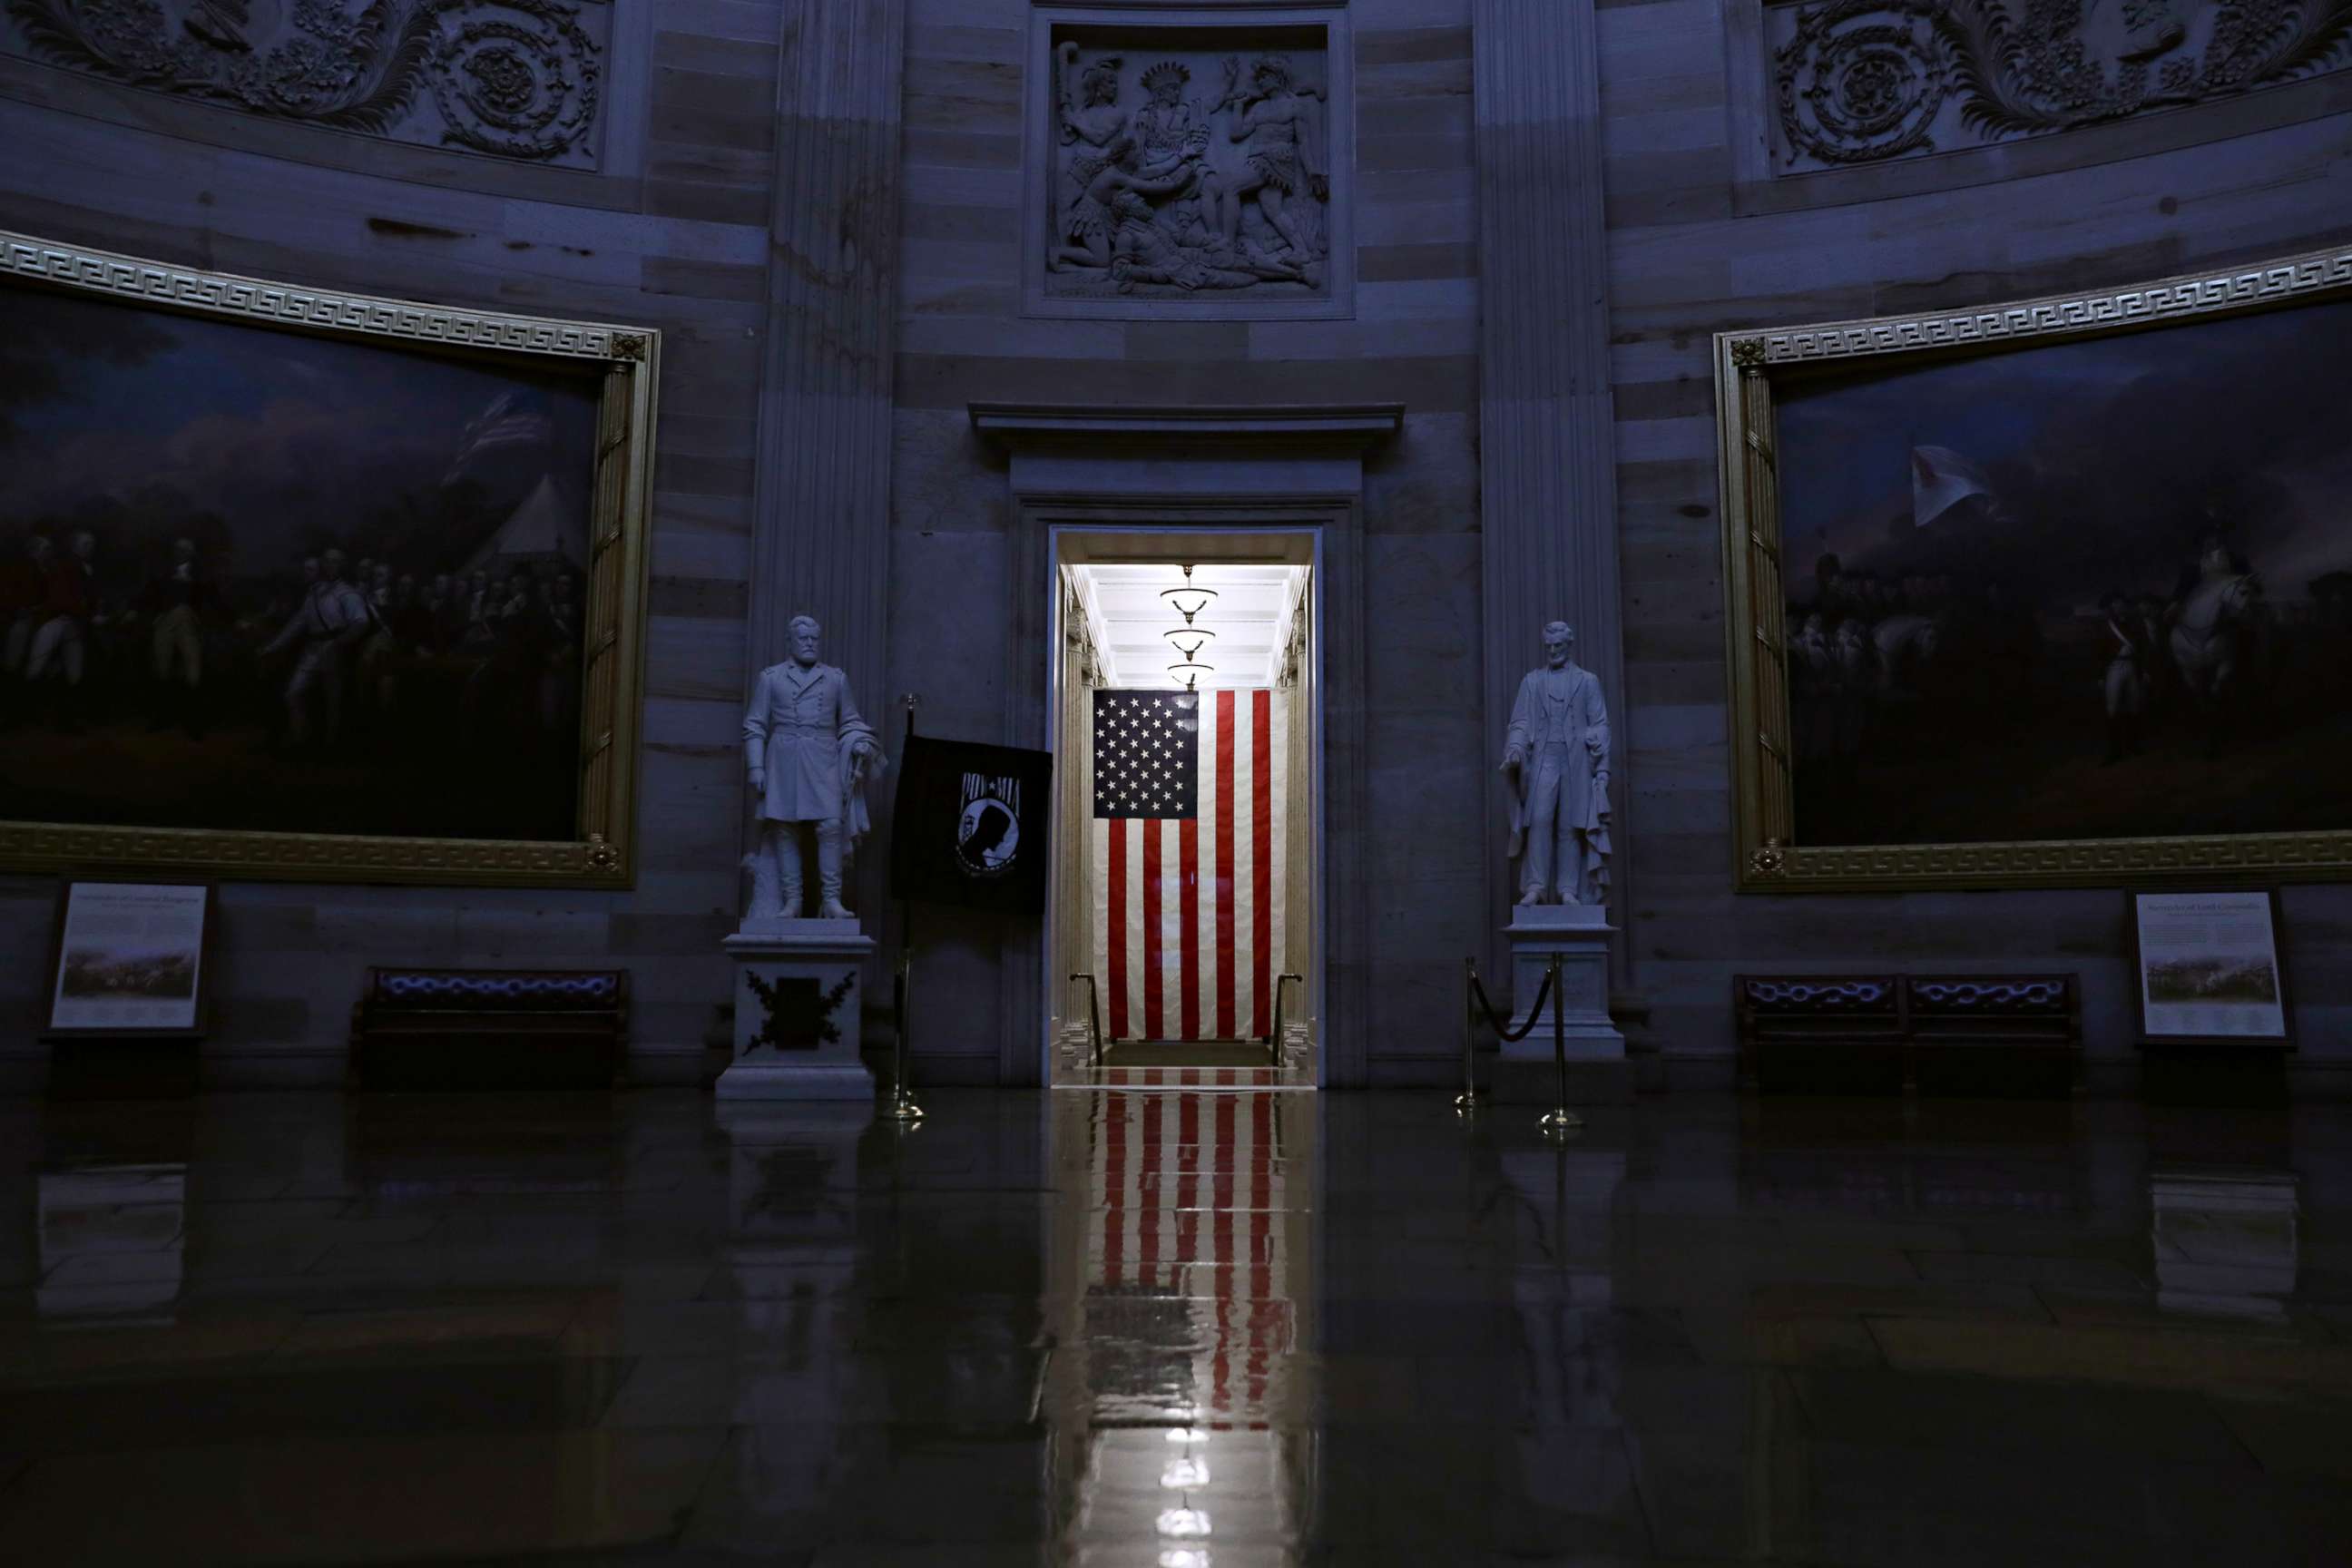 PHOTO: The Rotunda at the U.S. Capitol is empty after the last tour group has passed through, March 12, 2020, in Washington. The U.S. Capitol Visitor Center suspended all public tours until the end of March due to COVID-19.